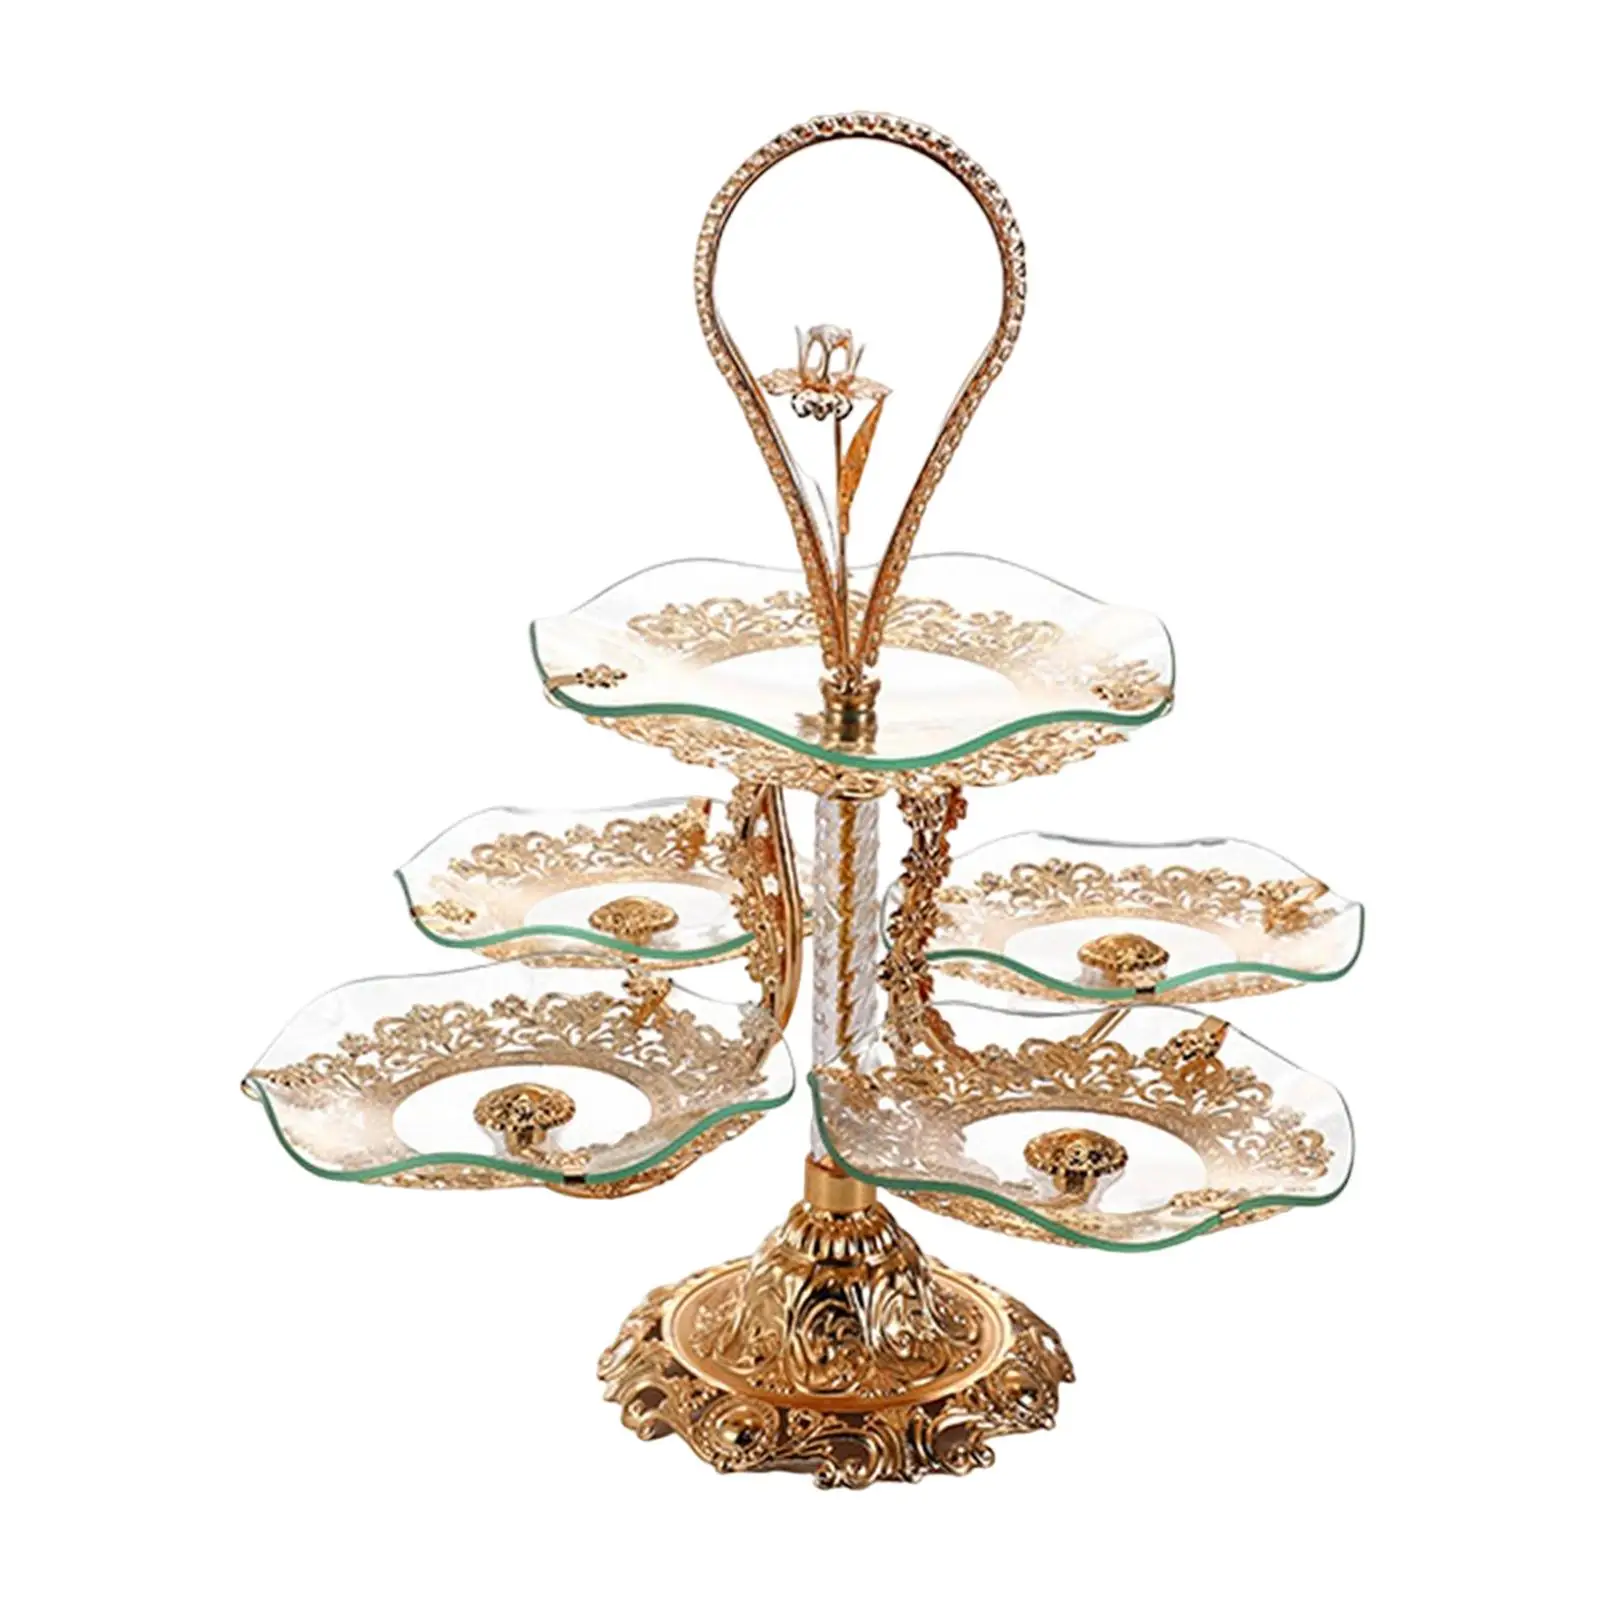 Multi Tier Serving Stand Tree Stand Exquisite Candy Dishware Storage Serving Tray for Kitchen